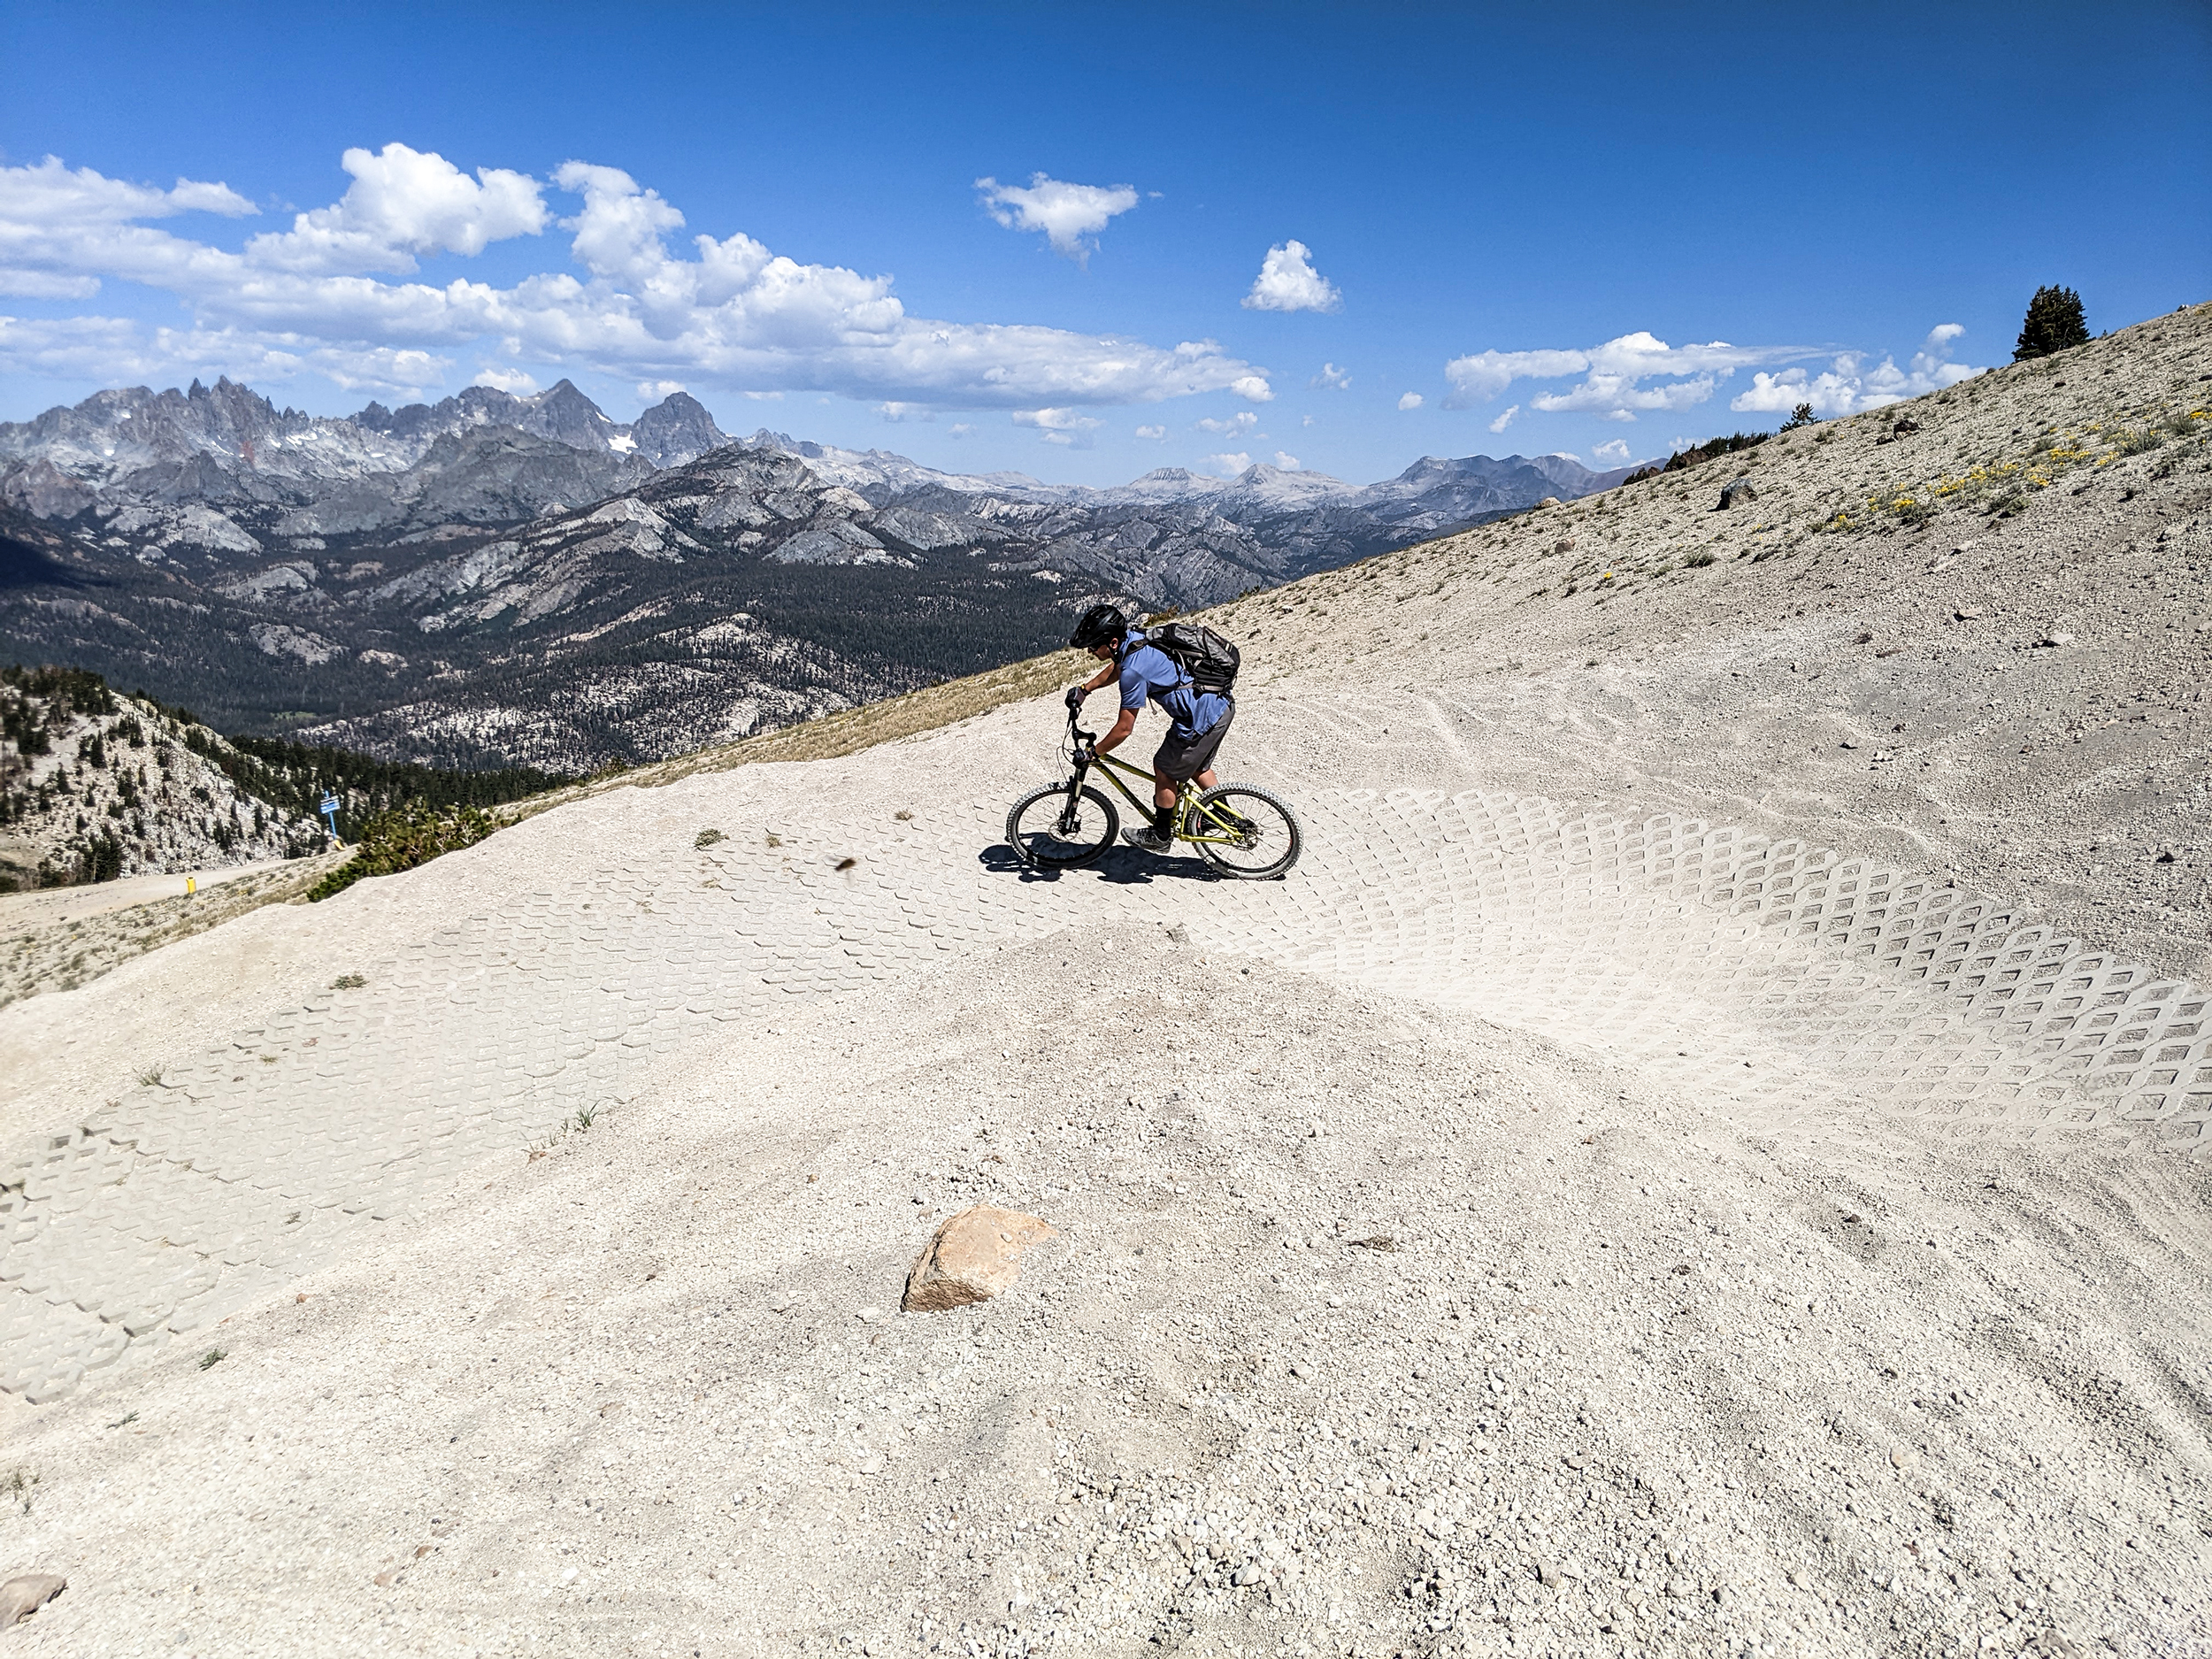 Paver Turn - Off the Top at the Mammoth Mountain Bike Park